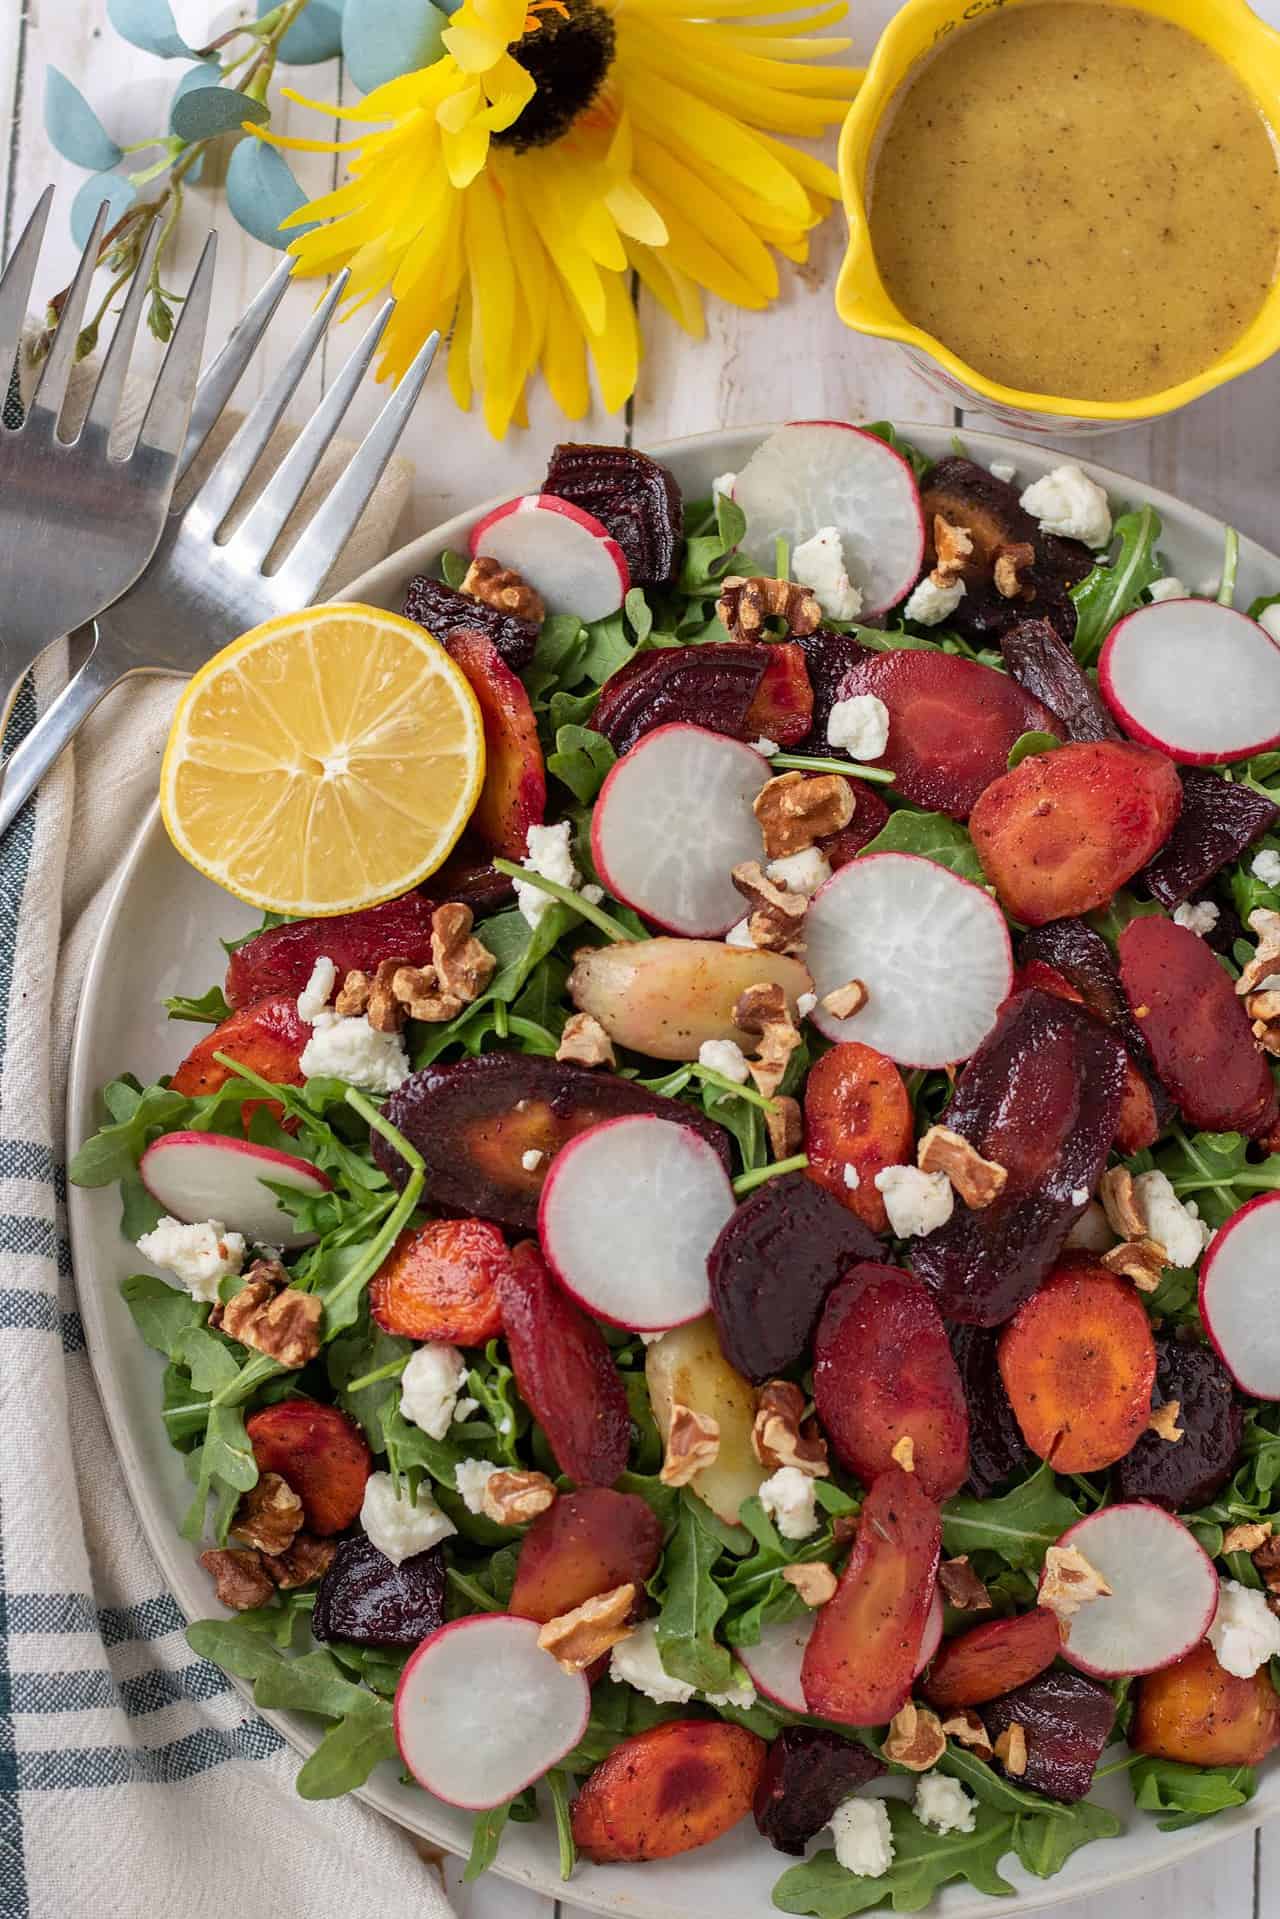 A large round serving plate with a roasted carrot, beet and arugula salad. The salad is colorful with sliced radishes, a halved lemon and goat cheese crumbles. Theres a silver serving fork next the plate and a large bright yellow flower.